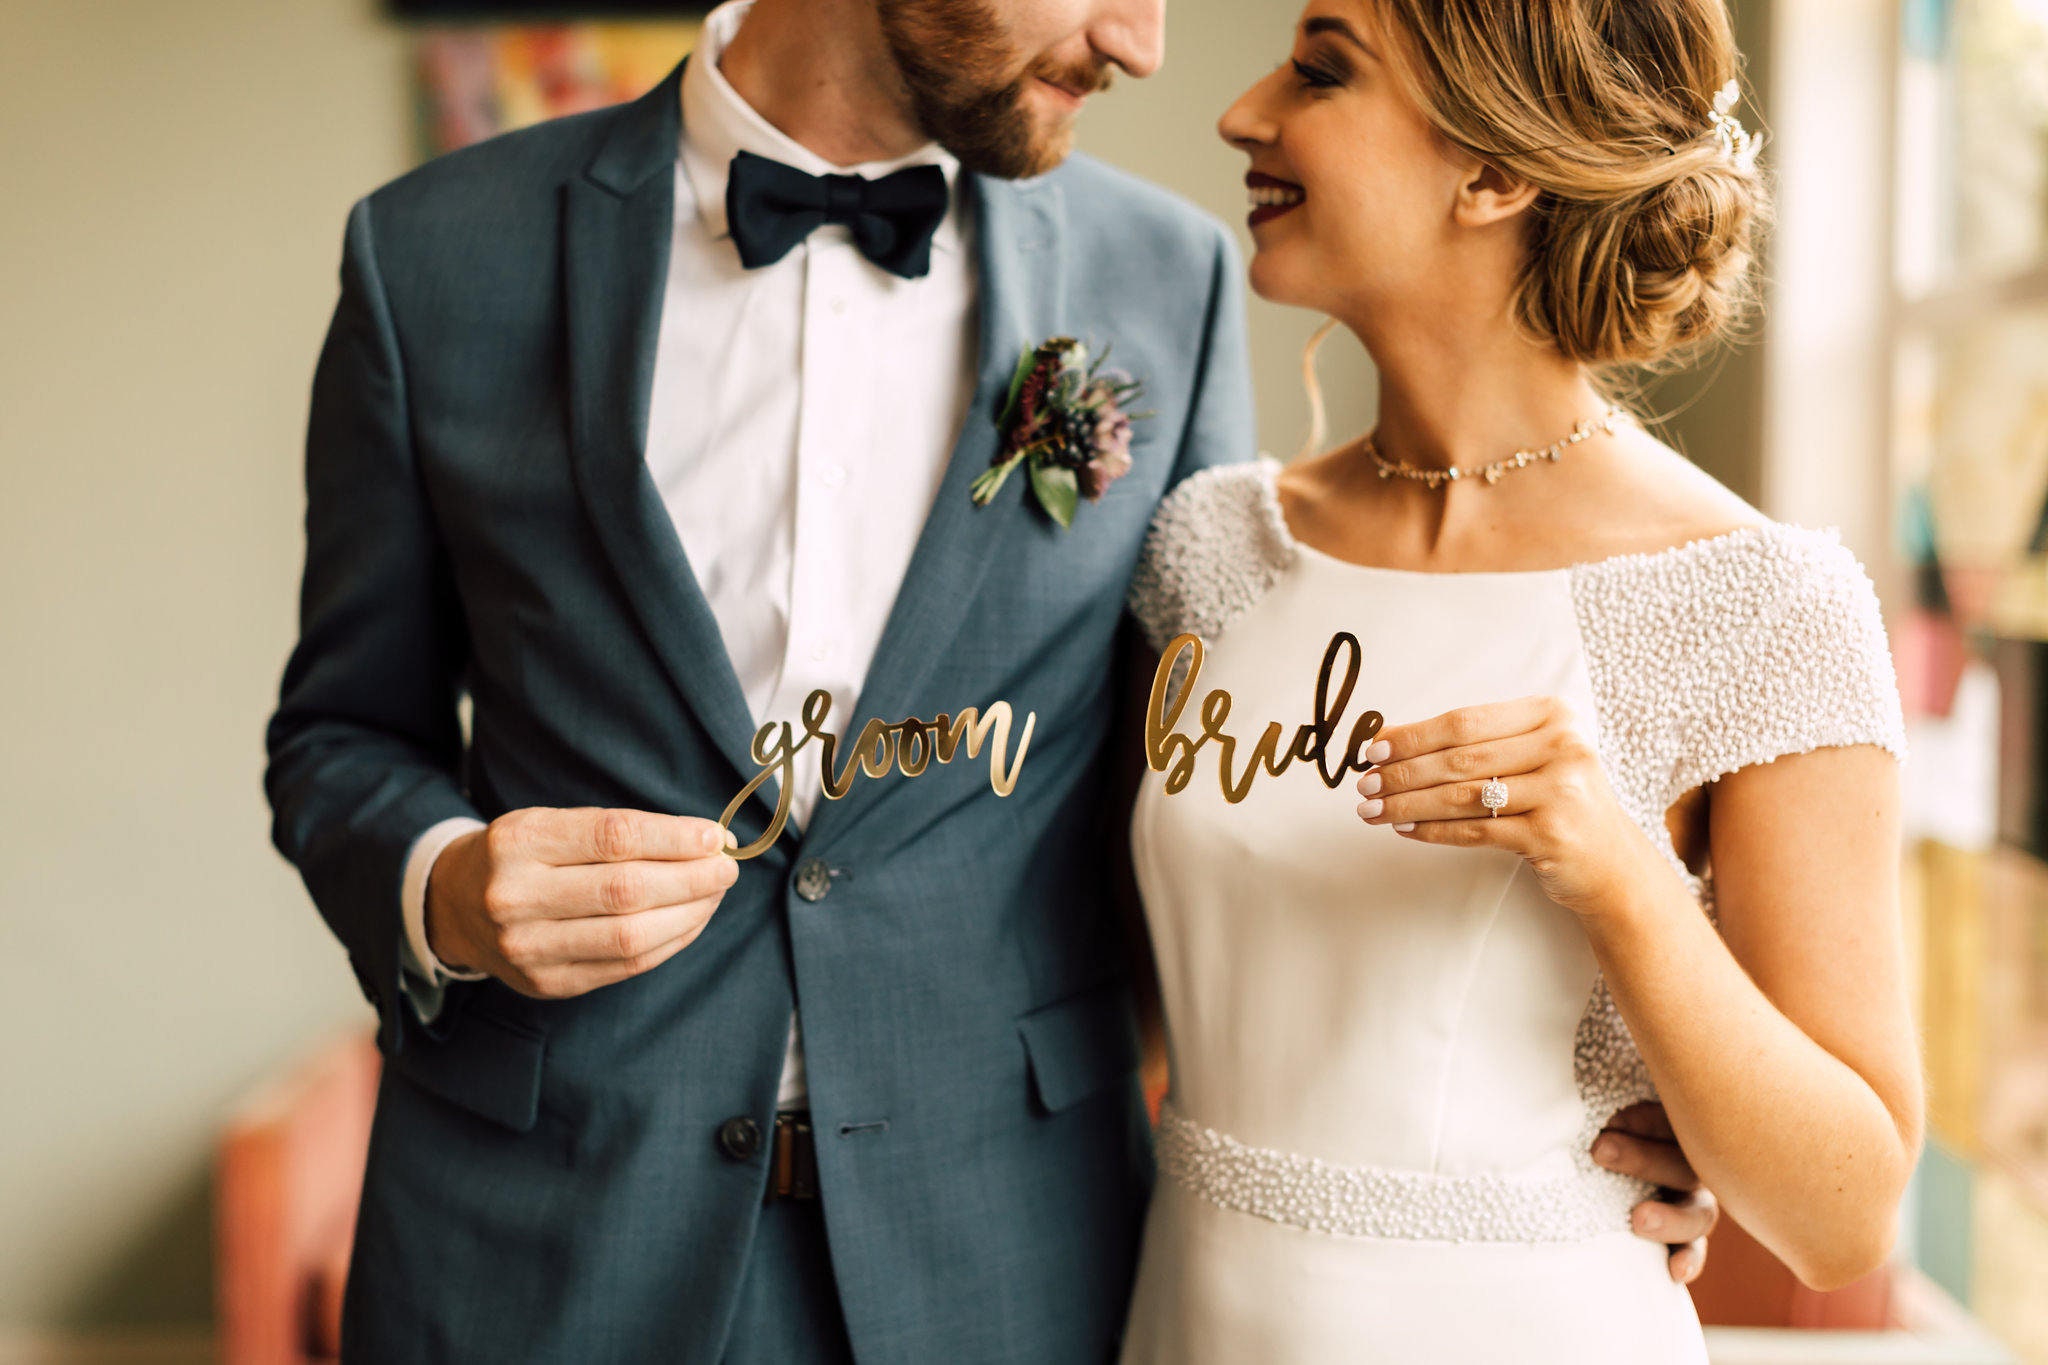 15 City Hall Wedding Dress Ideas for Your Courthouse Ceremony